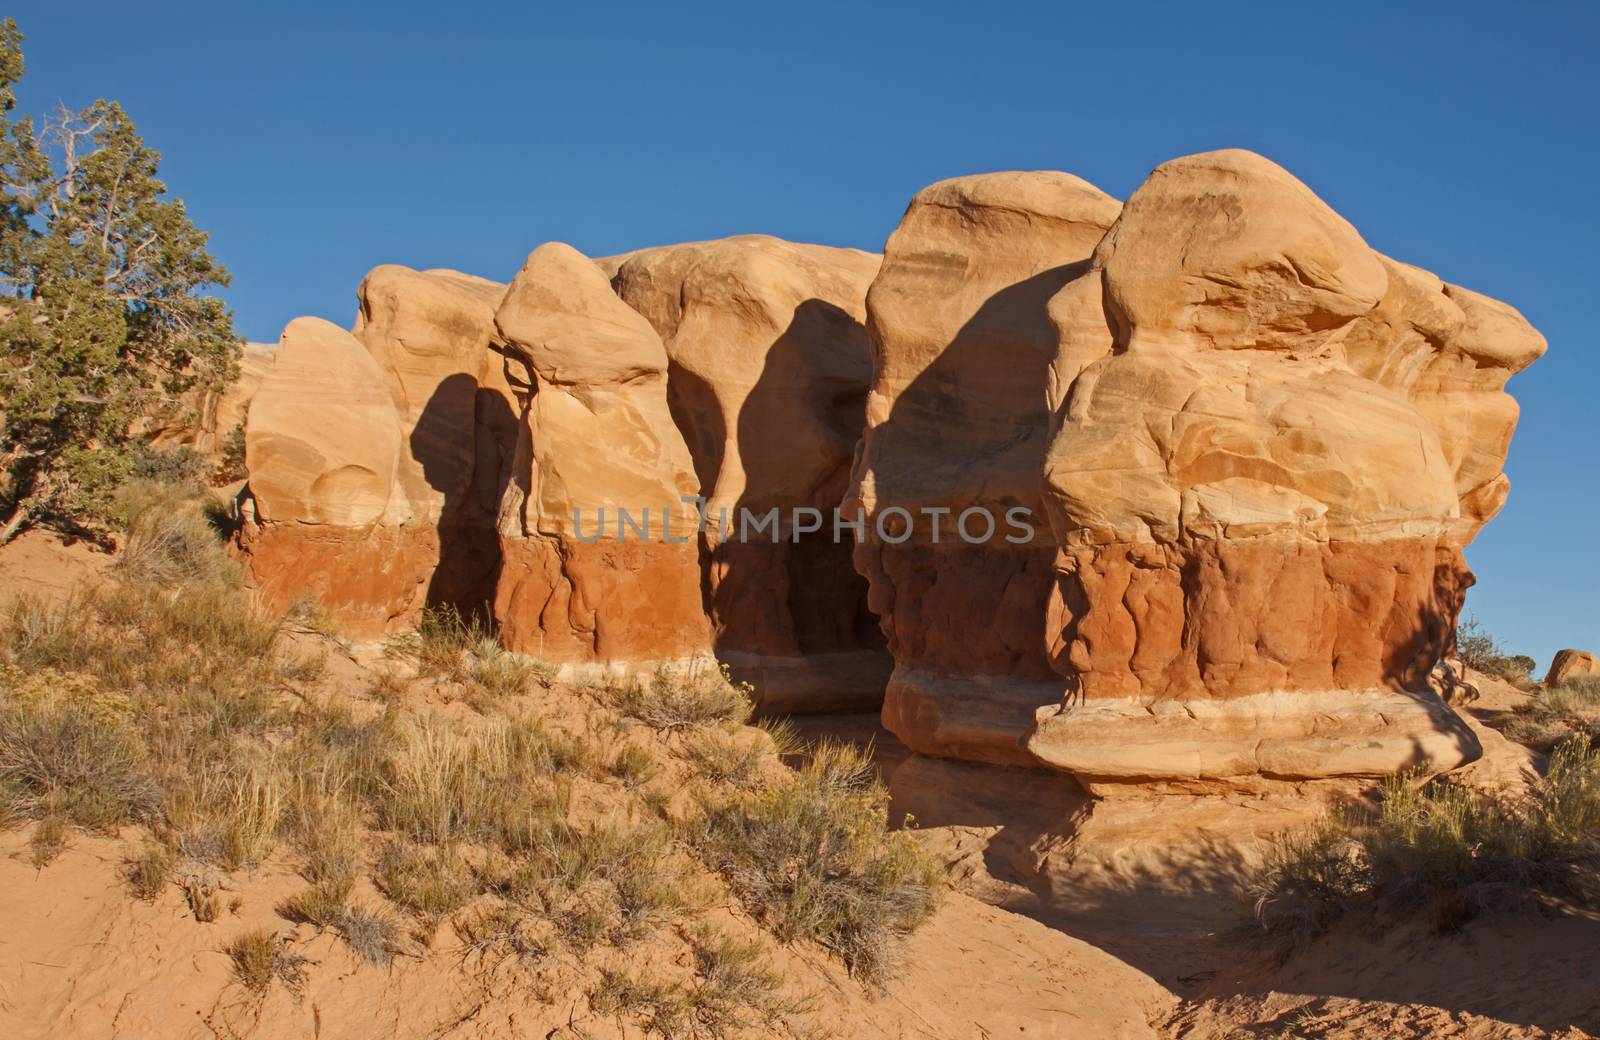 Strange Rock Formations in The Devil's Garden near the town of Escalante in the Staircase Escalante National Monument in Utah. USA